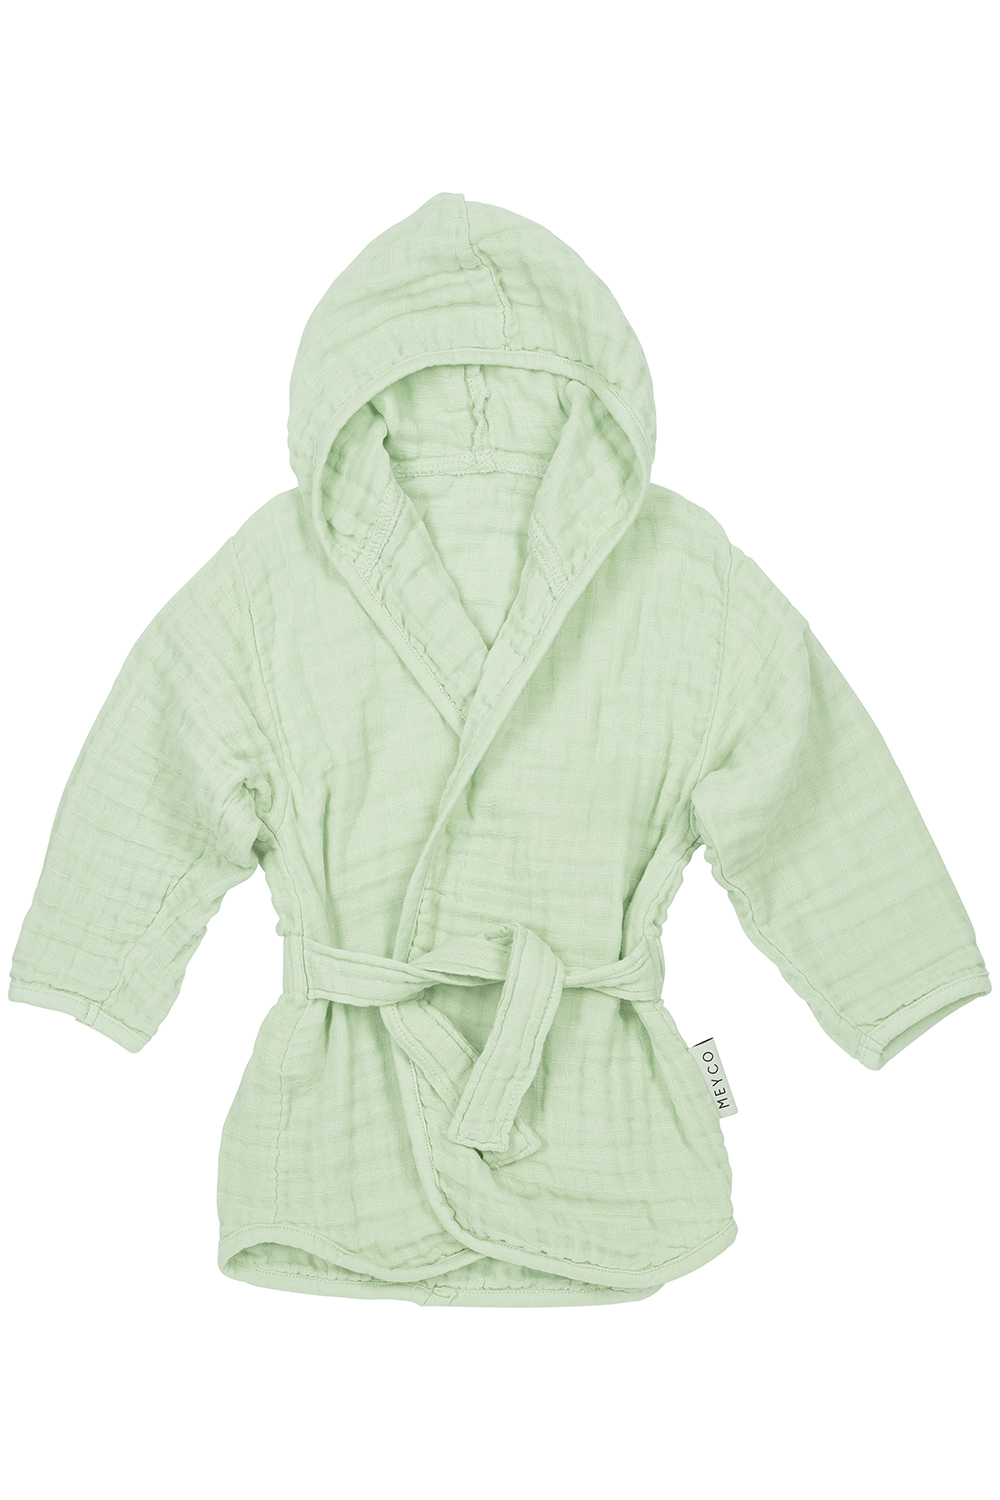 Bademantel pre-washed musselin Uni - soft green - 74/80